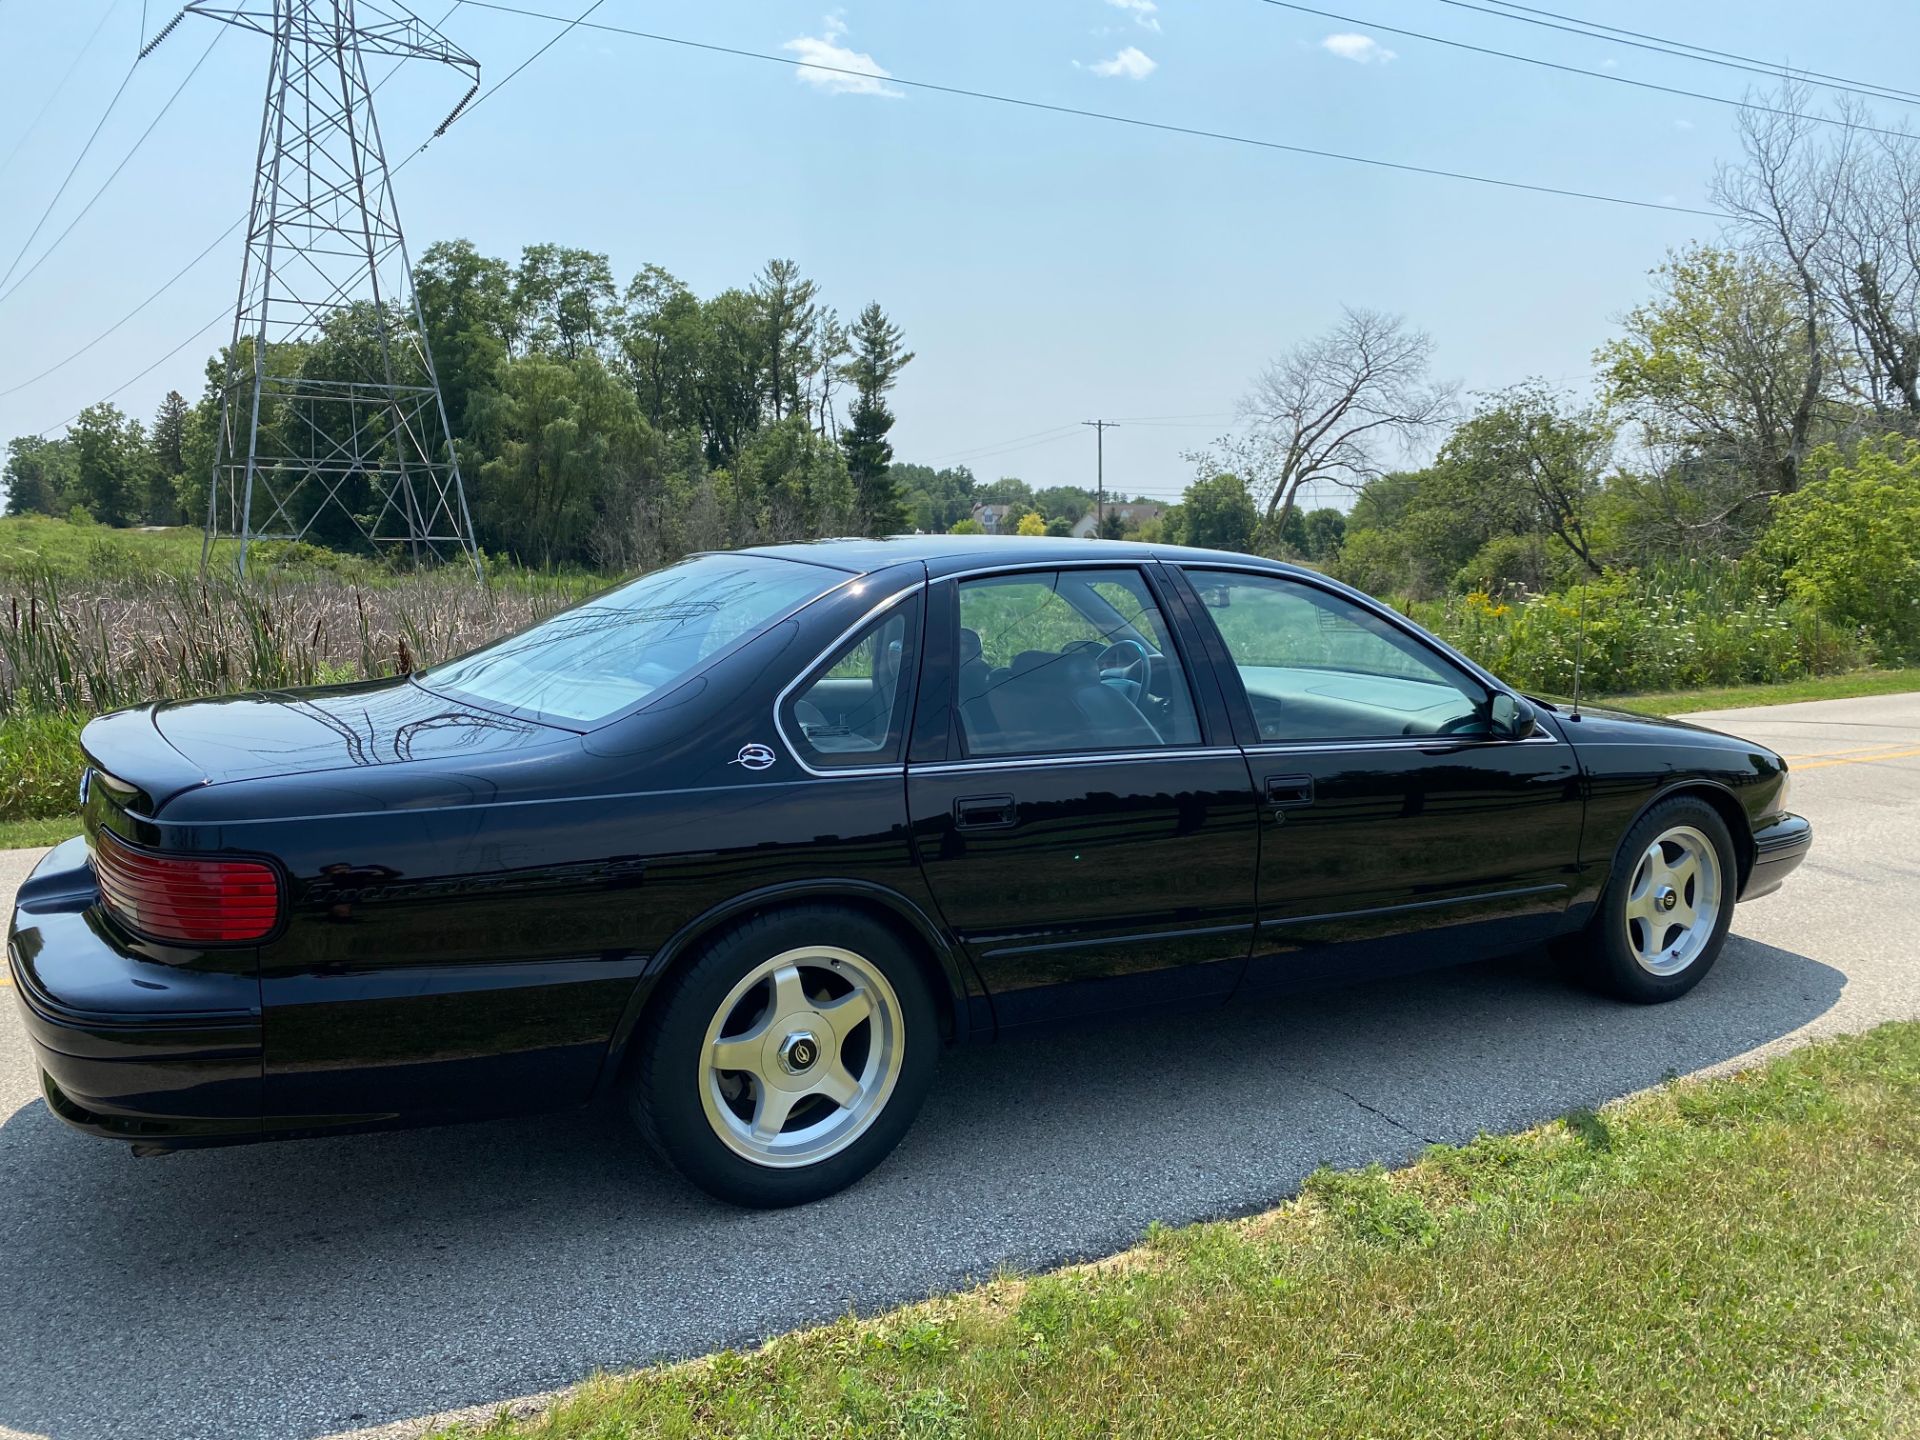 1996 Chevrolet Impala SS in Big Bend, Wisconsin - Photo 13